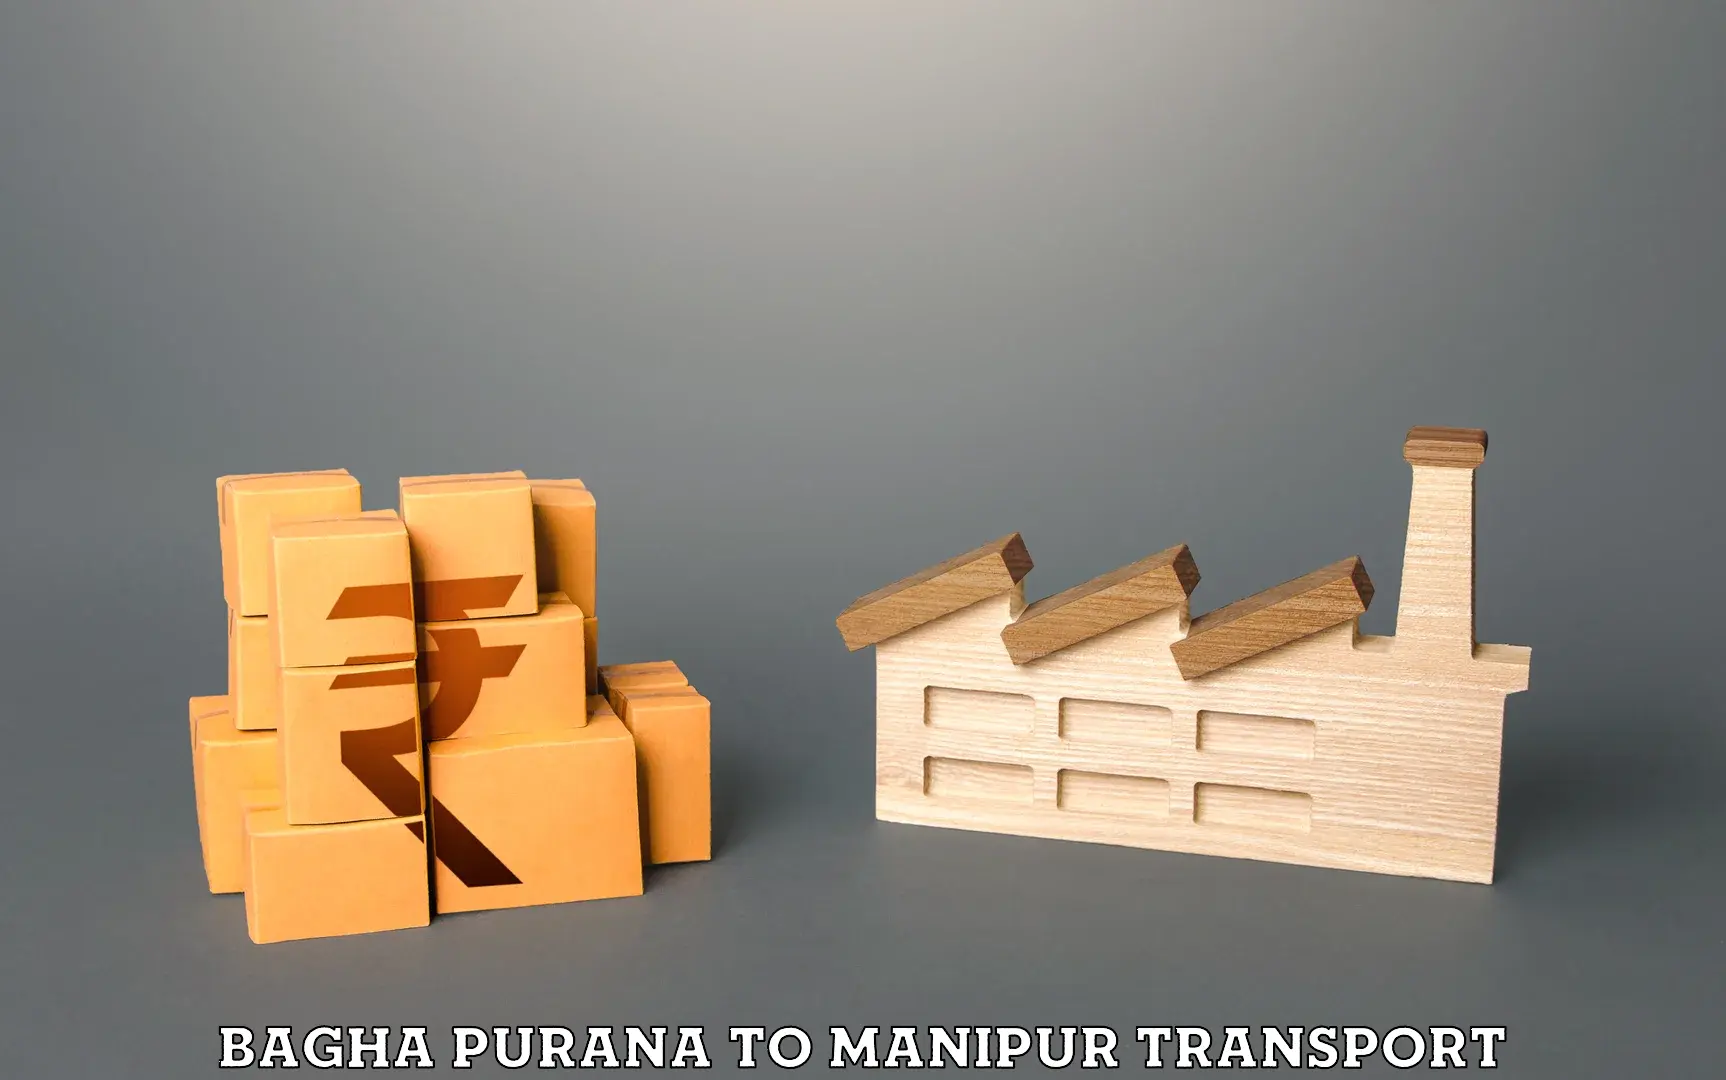 Transport in sharing Bagha Purana to Manipur